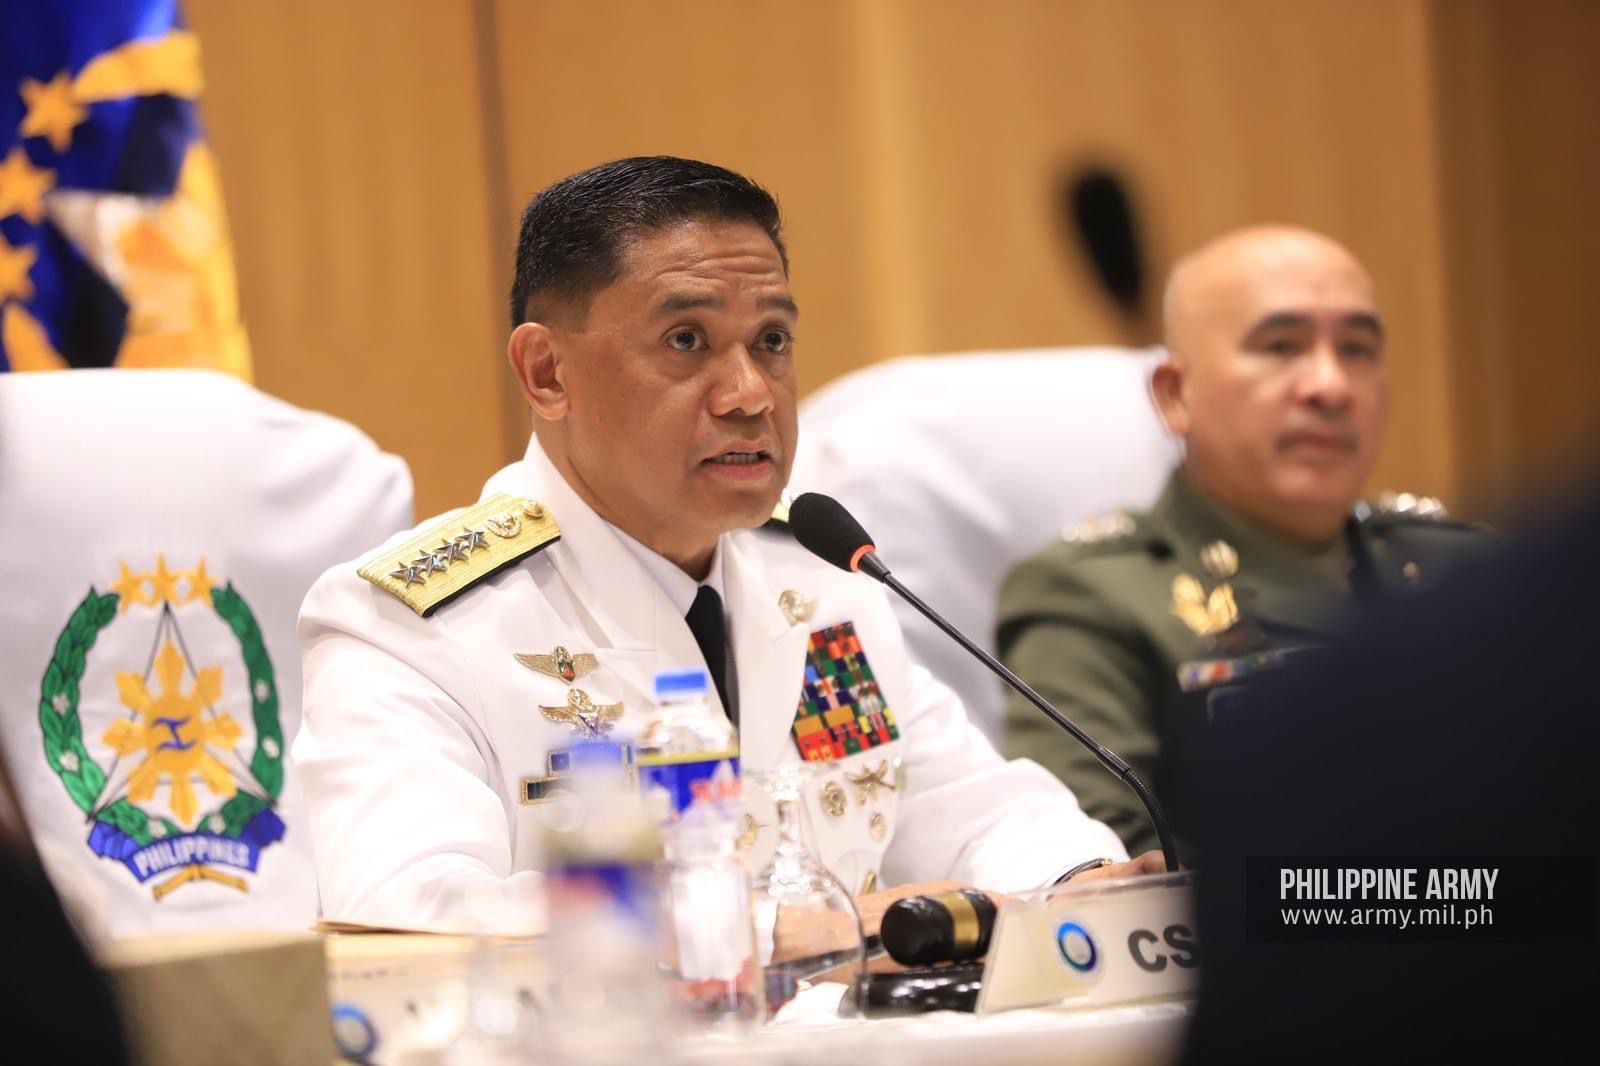 Following China Coast Guard’s water cannon attack against Philippine vessels, Armed Forces of the Philippines (AFP) chief of staff Romeo Brawner Jr. has ordered the temporary suspension of sending officials to China for their studies.